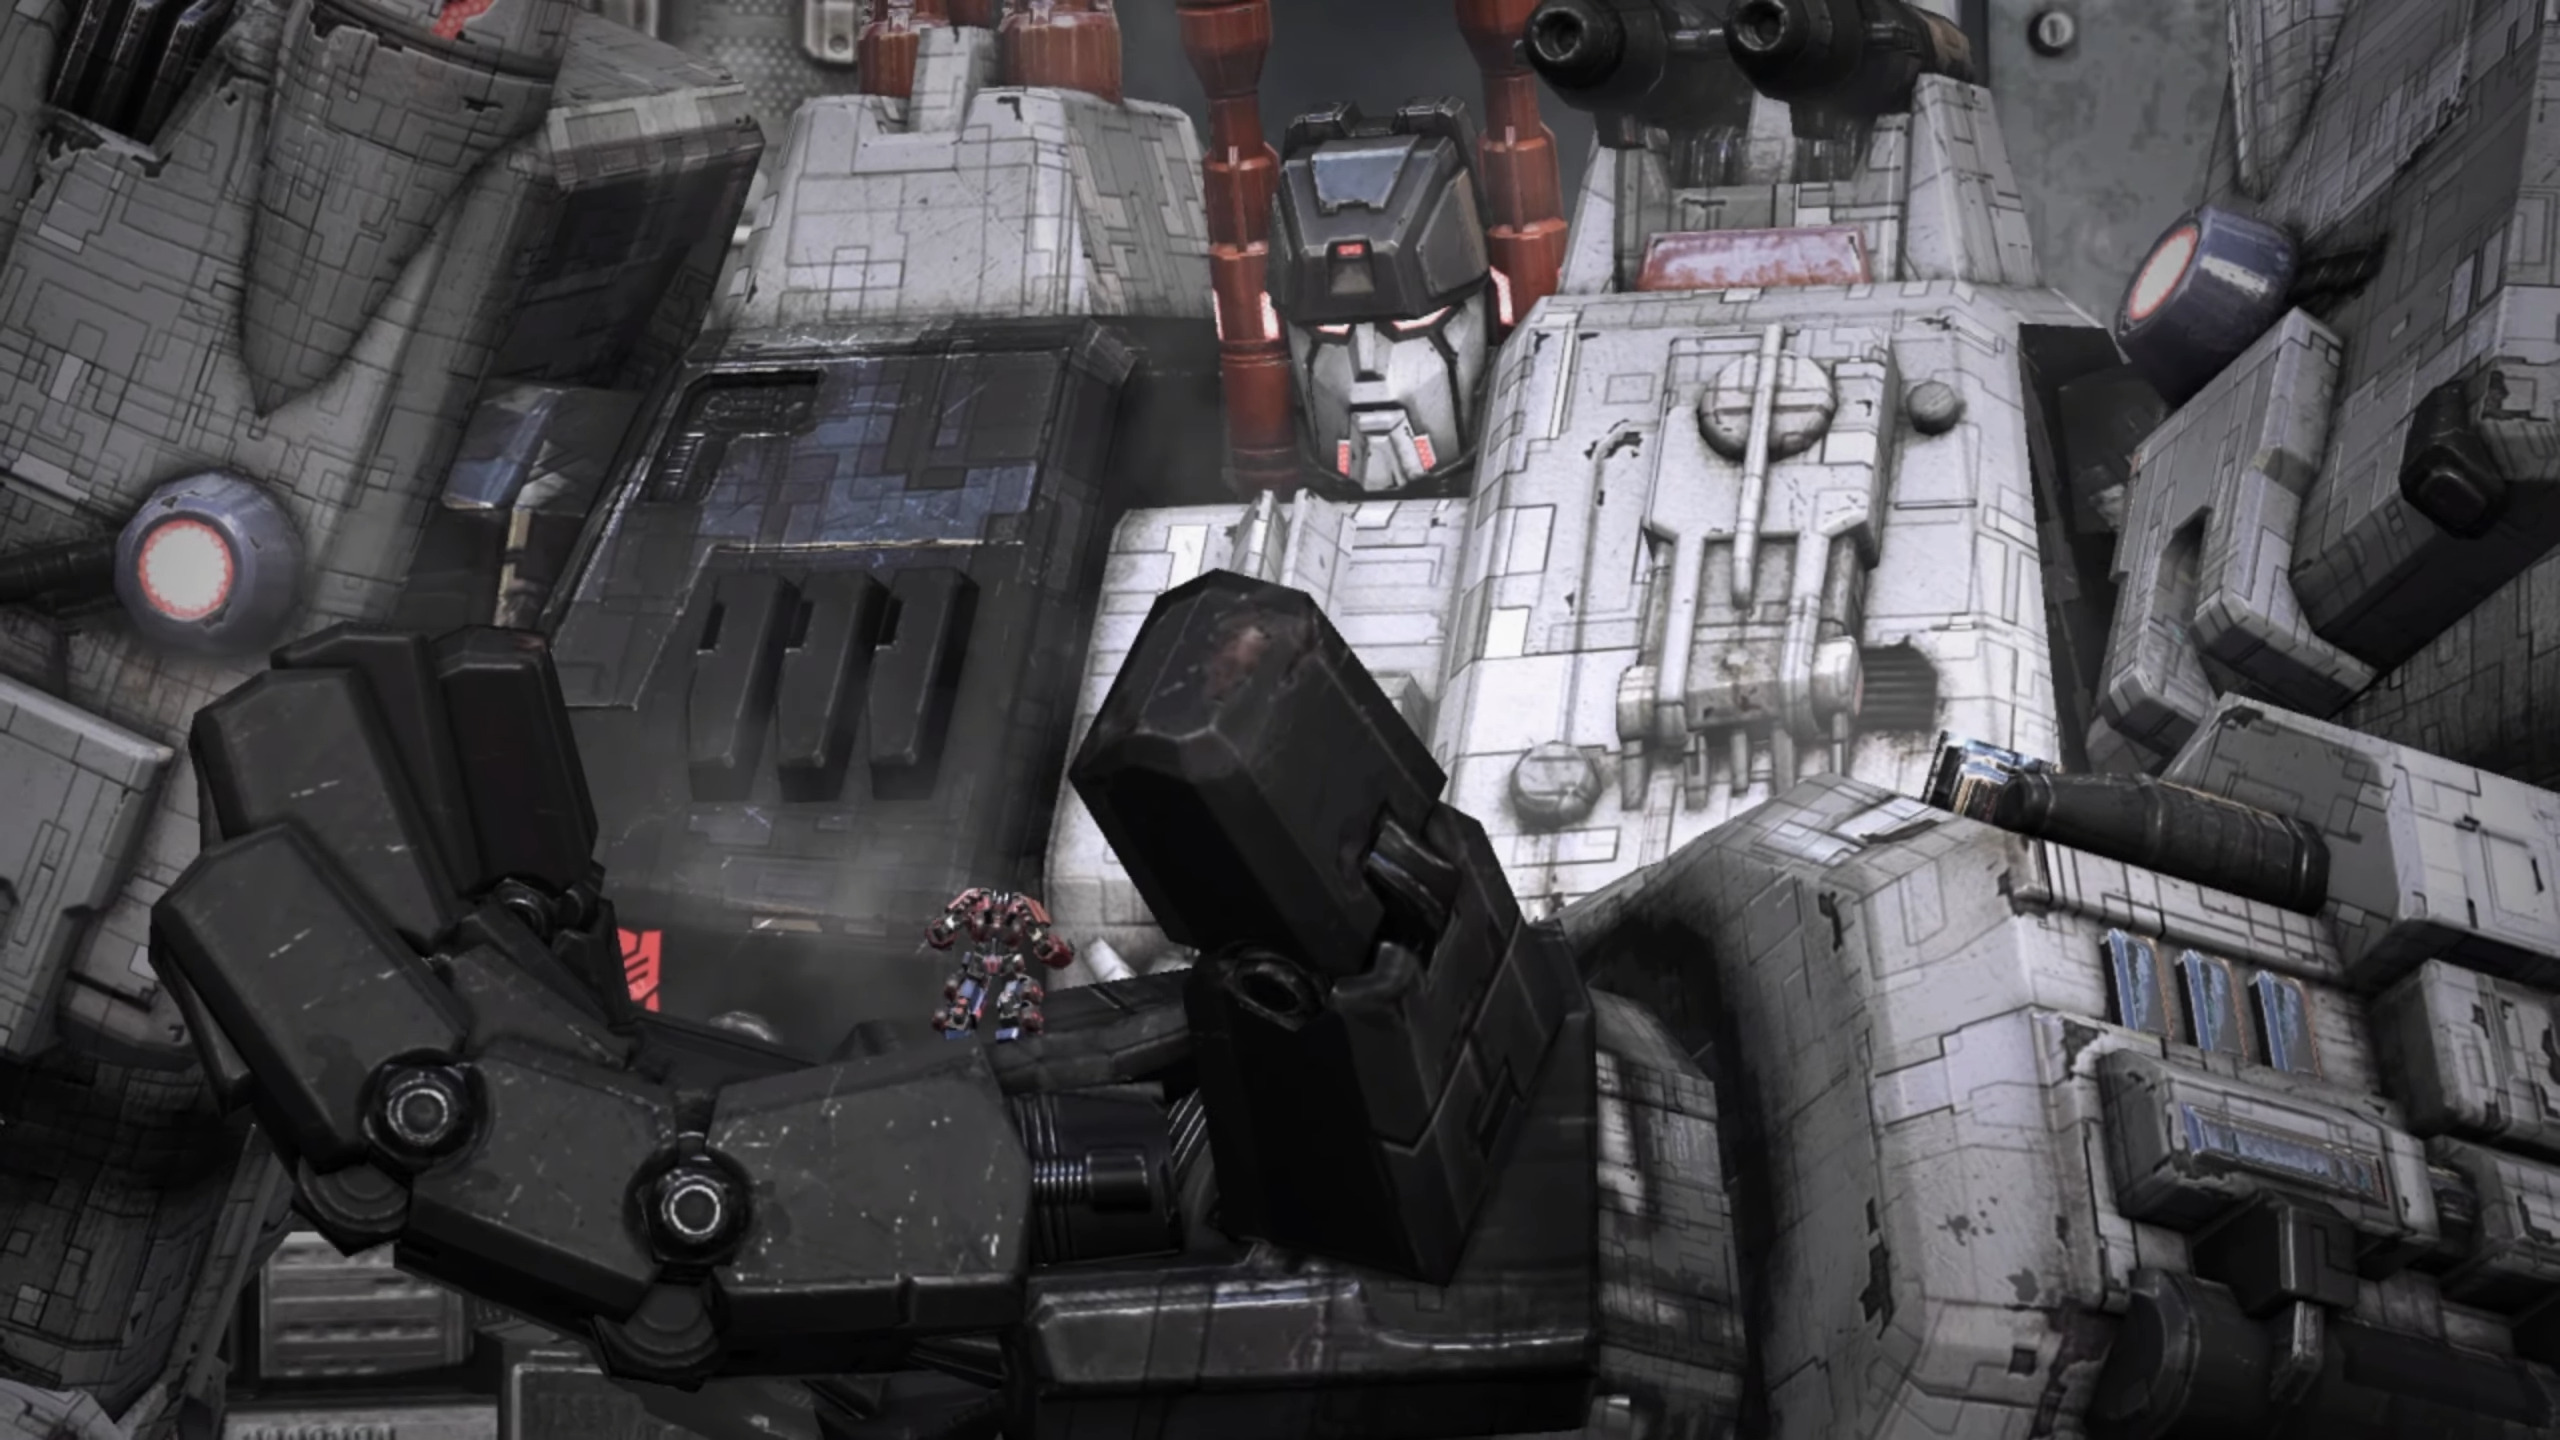 Metroplex (Fred Tatasciore) heeds the call of Optimus Prime (Peter Cullen) in Transformers: Fall of Cybertron (2012), Activision